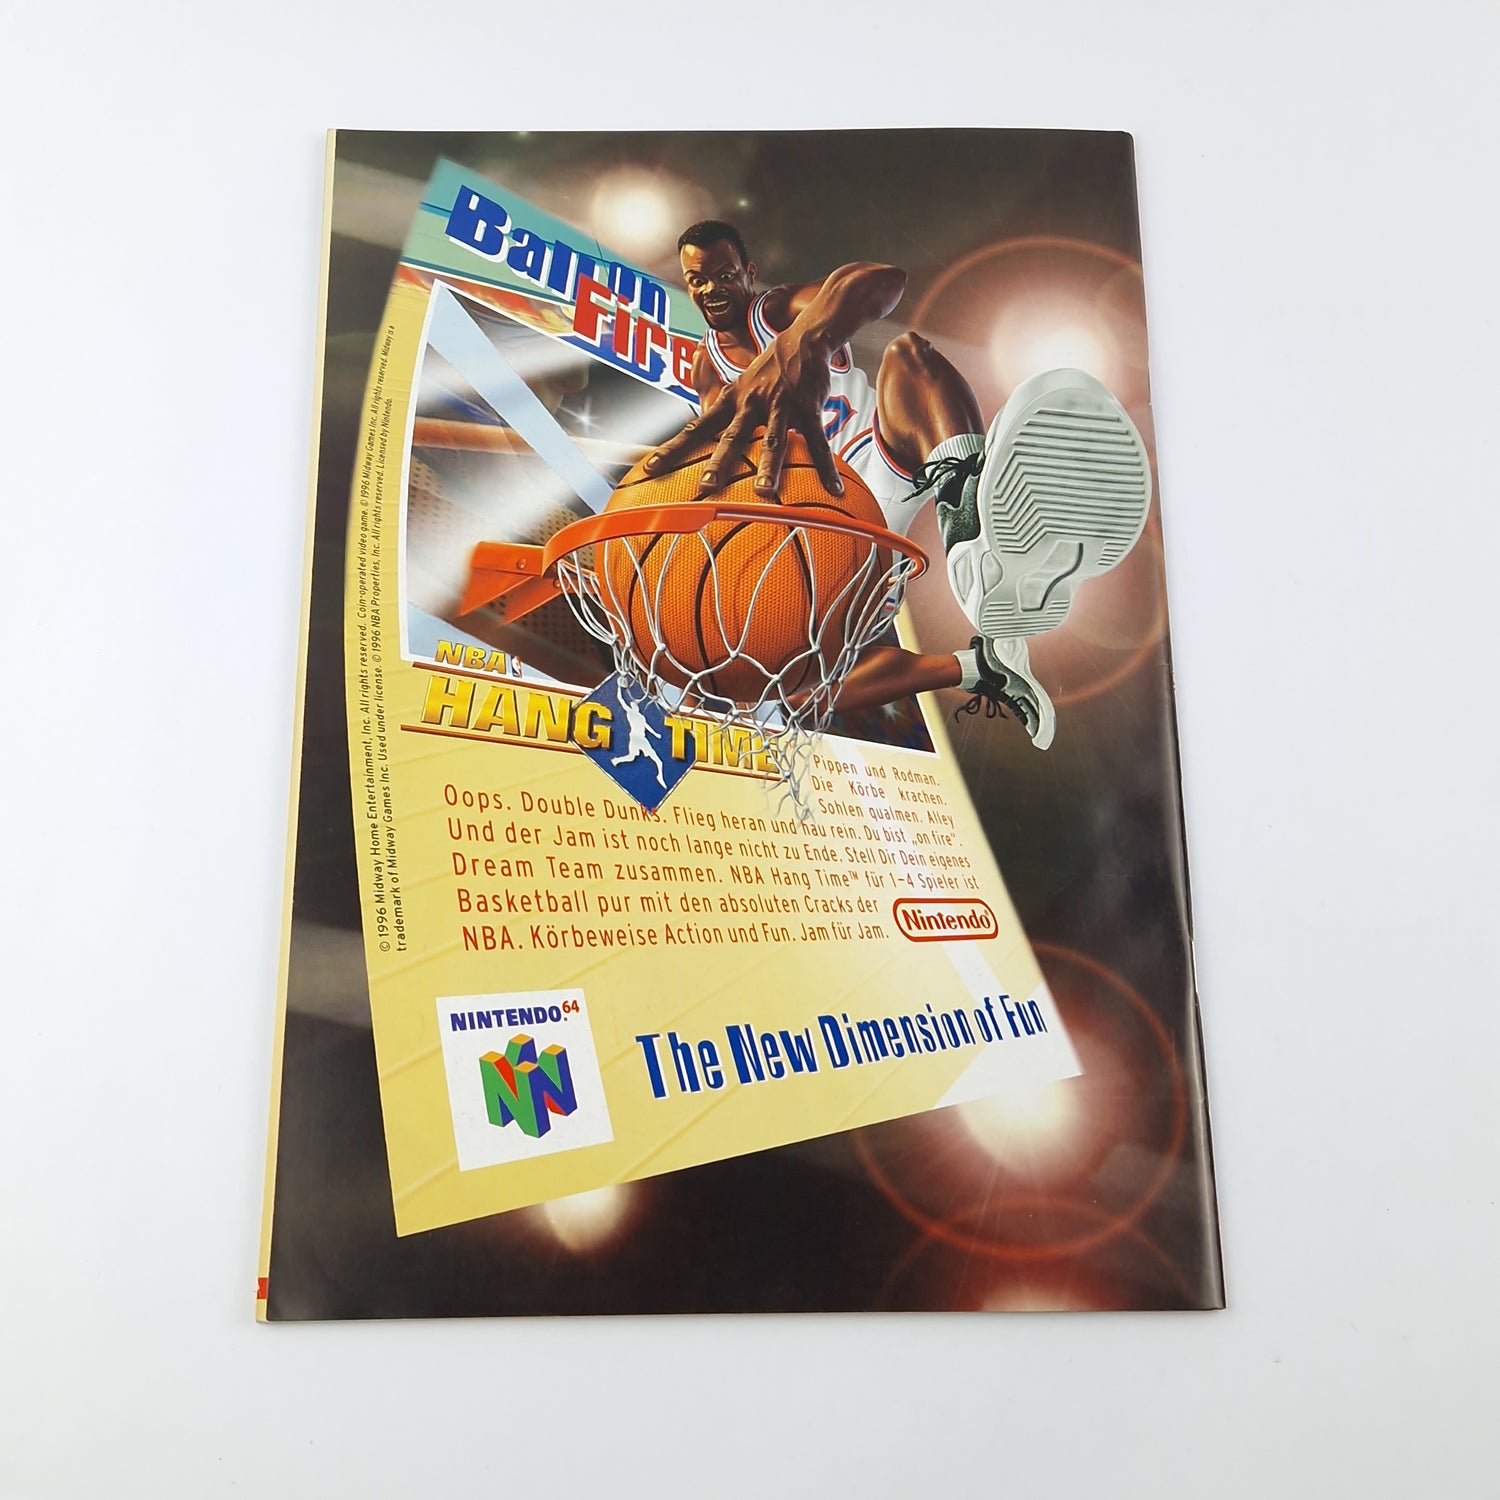 100% Nintendo TOTAL! Magazine: July 7/97 with giant poster - magazine 1997